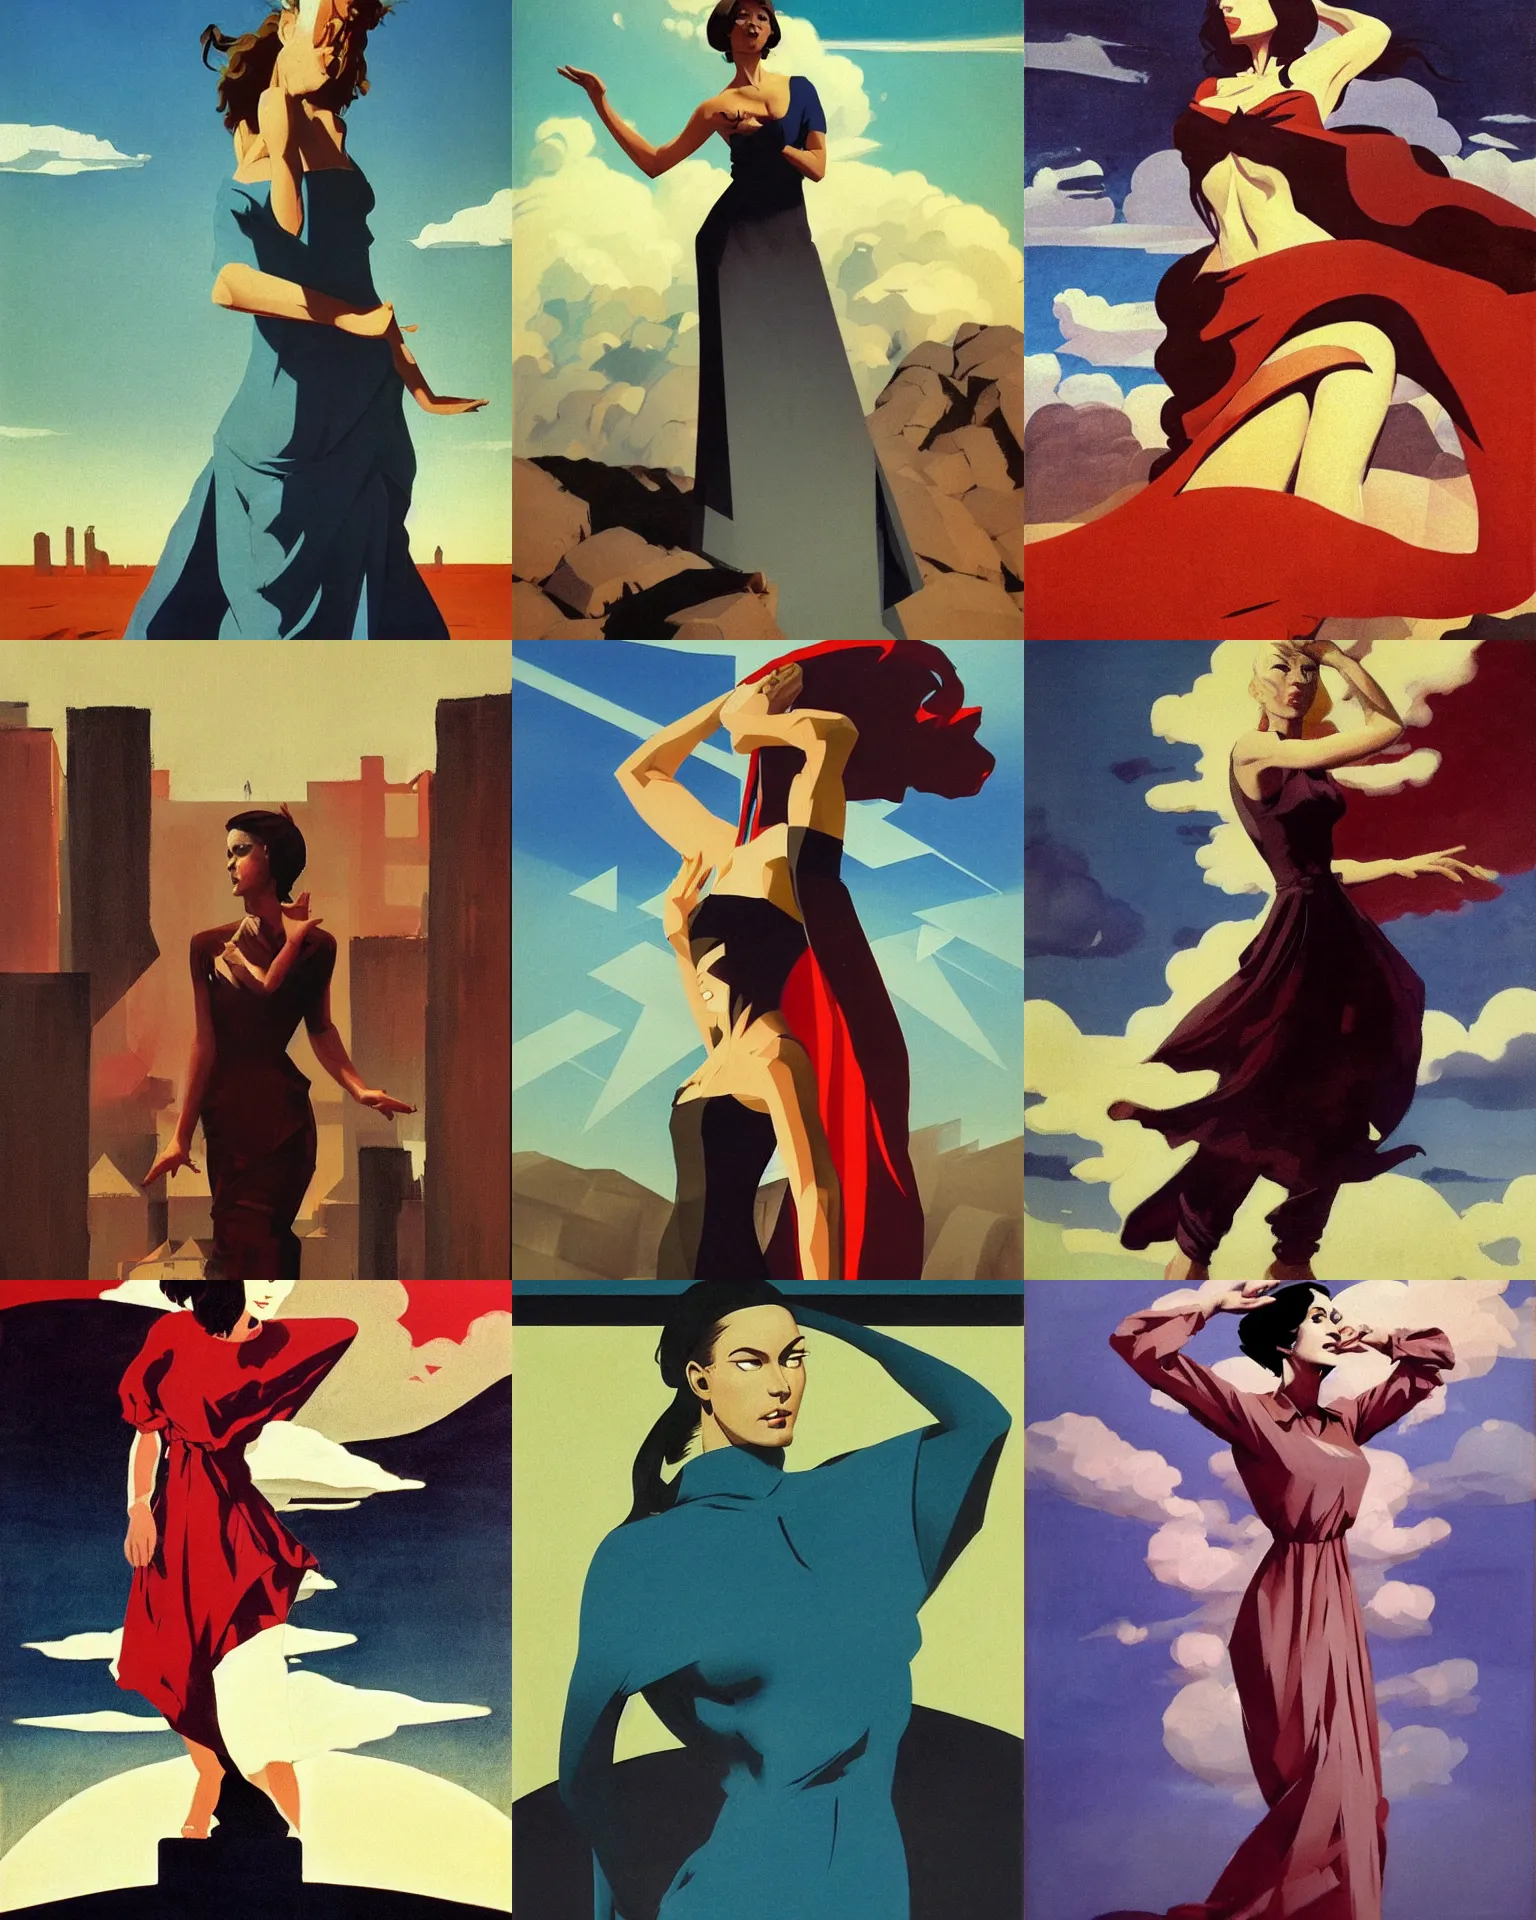 Prompt: woman portrait, female figure in maxi dress, sky, thunder clouds modernism, dynamic pose, dance, low poly, low poly, low poly, industrial, soviet painting, social realism, barocco, Frank Frazetta, Dean Ellis, Detmold Charles Maurice, 1993 anime,